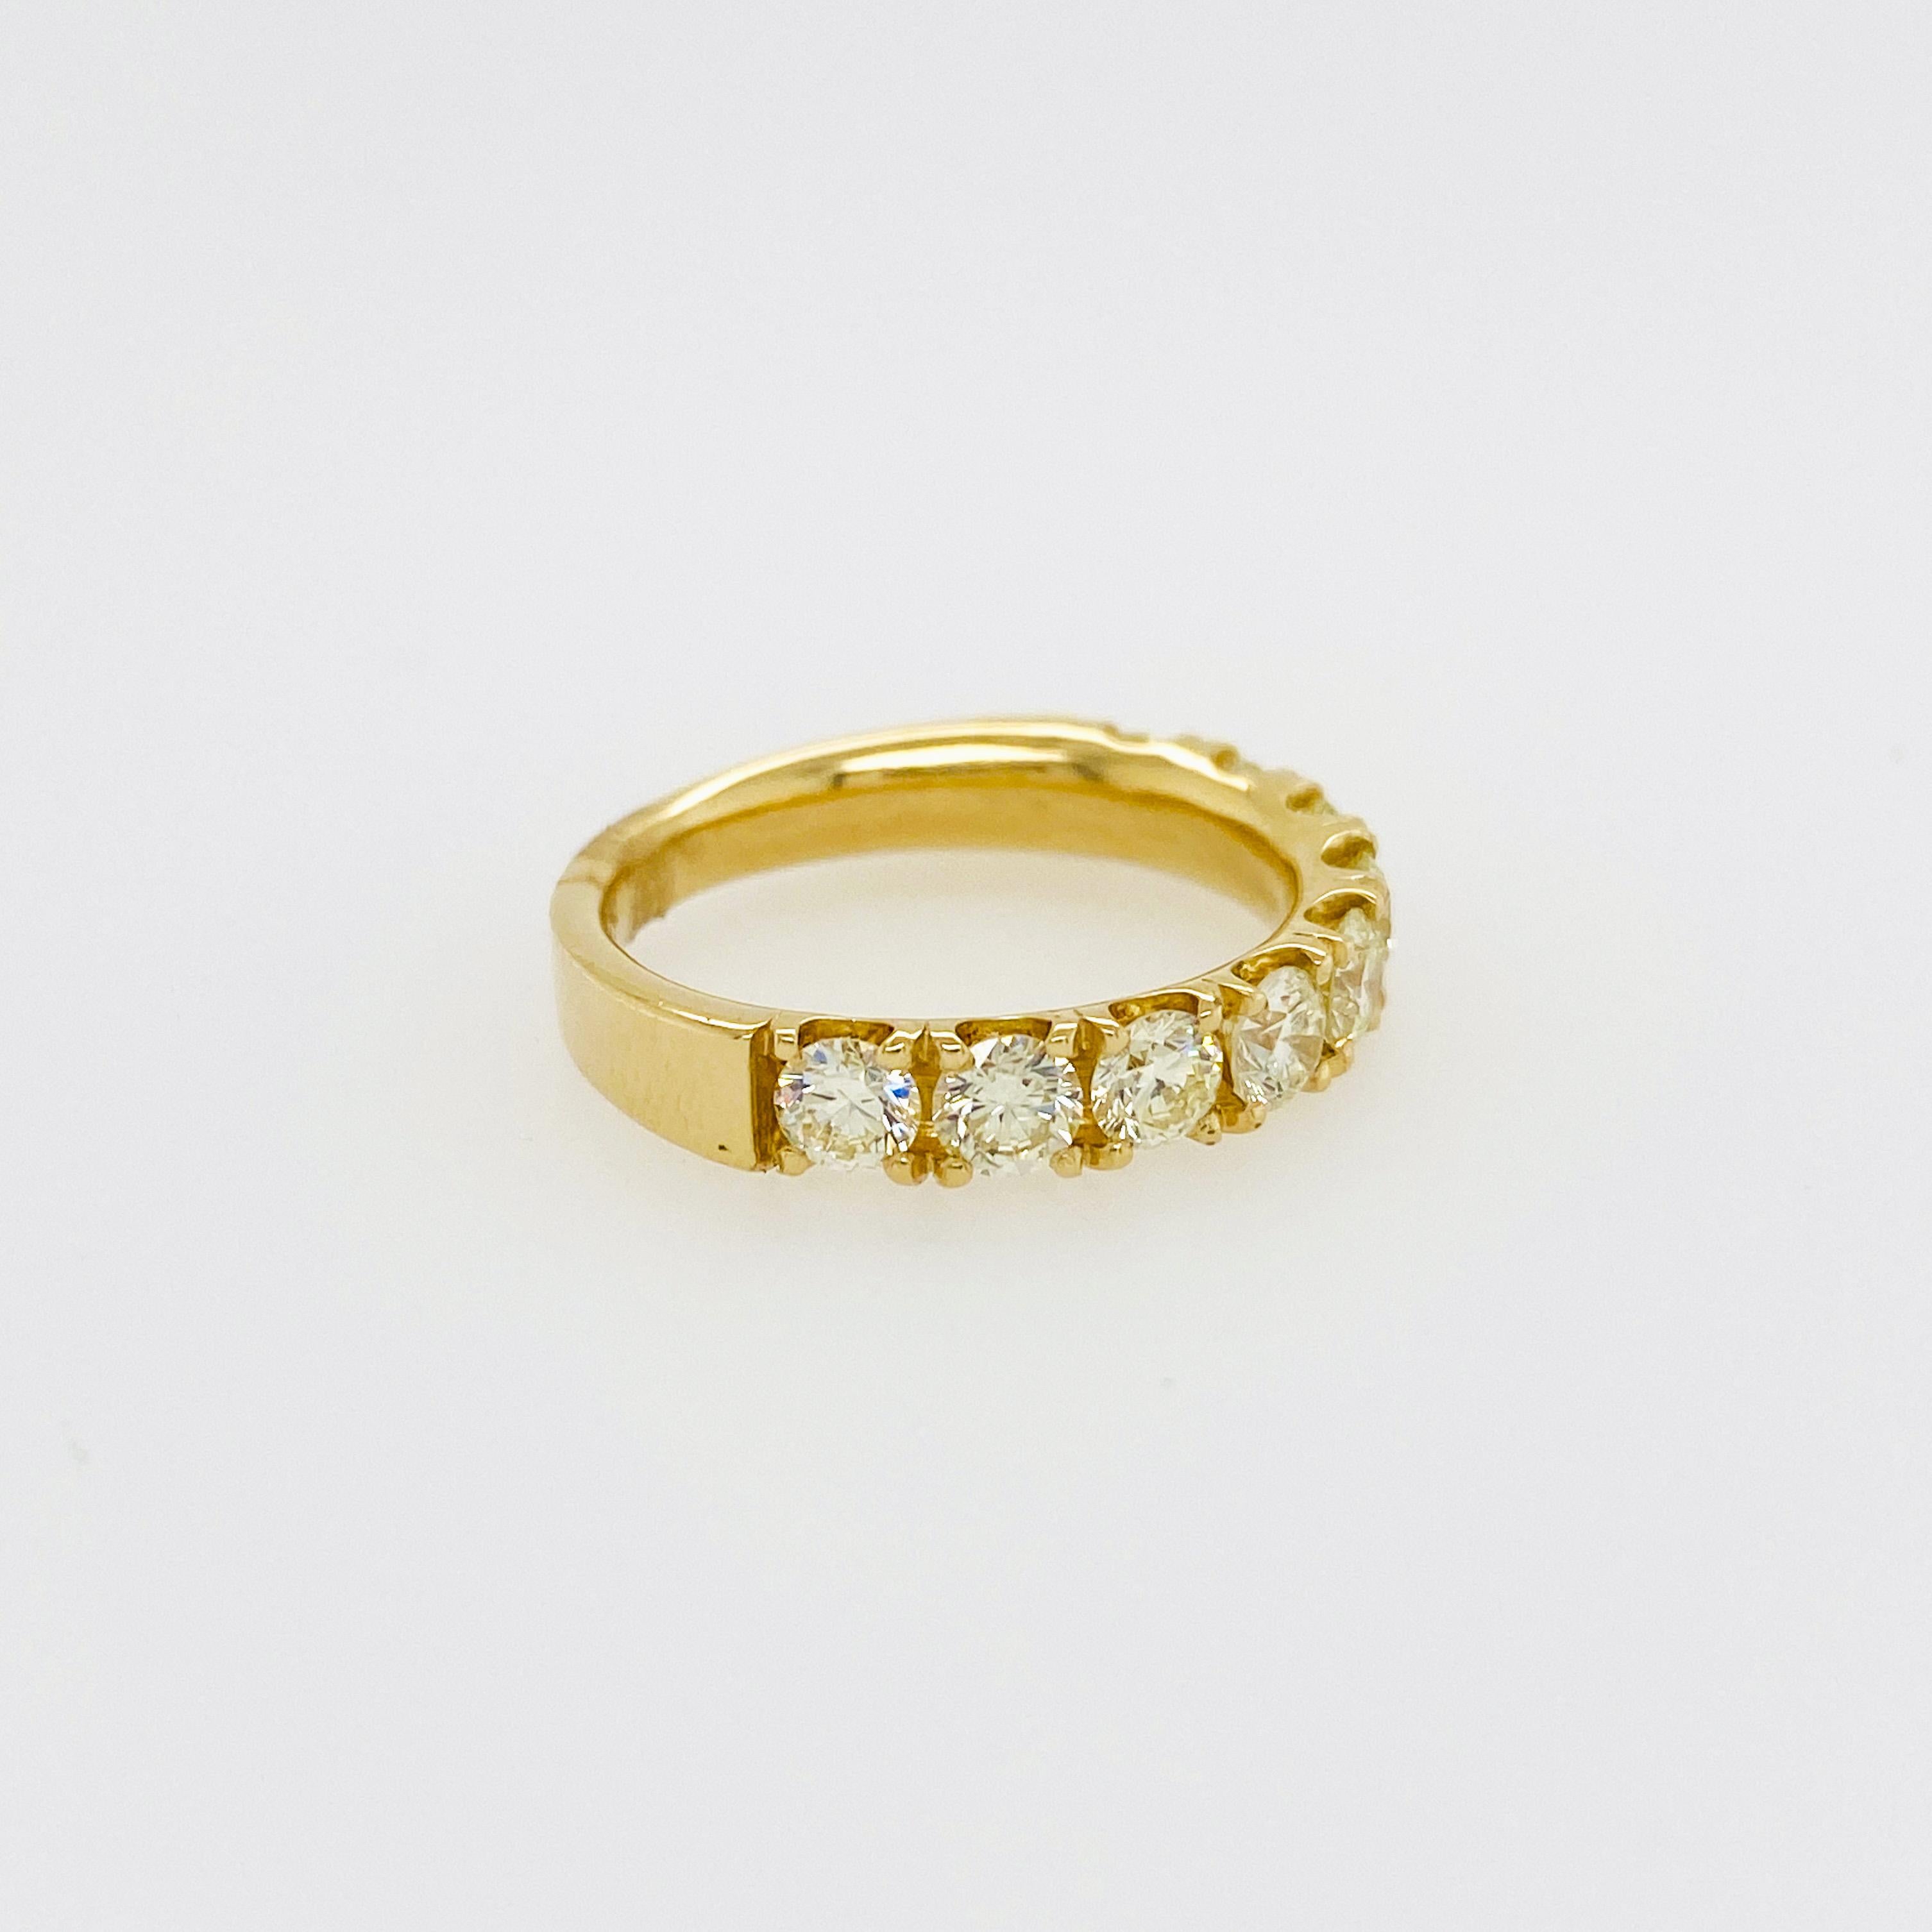 The diamond band has nine round brilliant diamonds set in four yellow gold prongs. The half diamond band is the perfect size to wear solo or pair it with other stackable rings. Thee design is classic and sleek with a low profile setting and secure